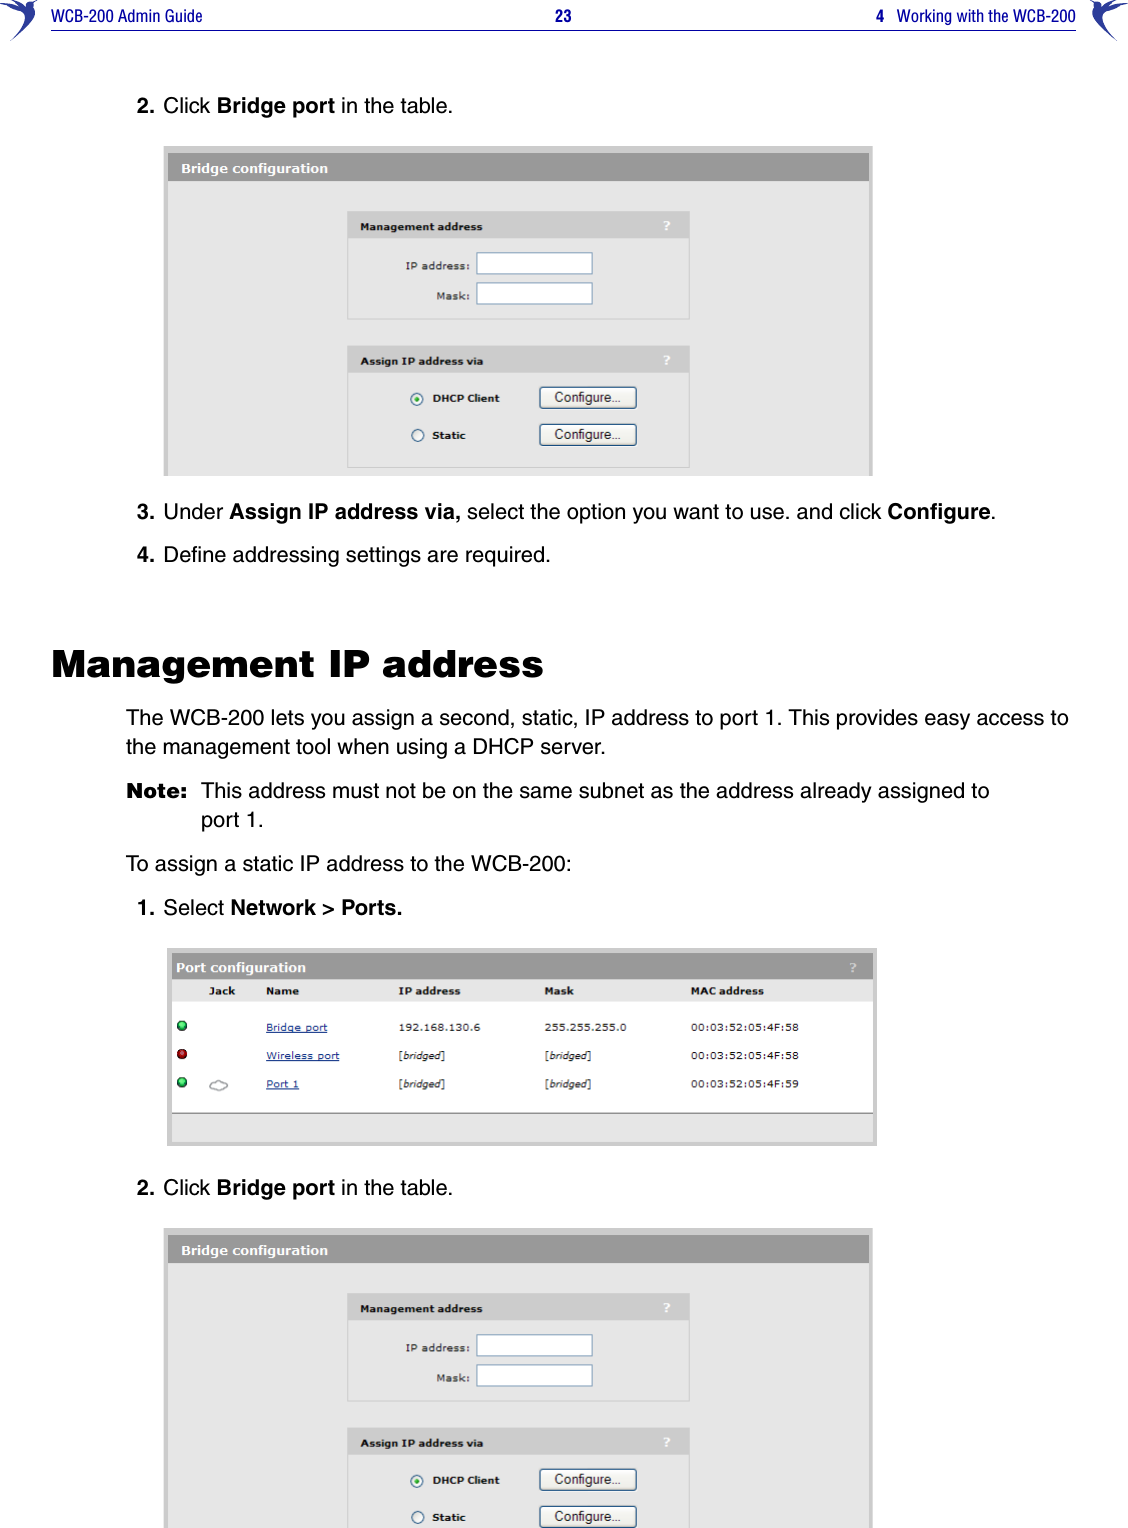 WCB-200 Admin Guide 23 4   Working with the WCB-2002. Click Bridge port in the table.3. Under Assign IP address via, select the option you want to use. and click Configure.4. Define addressing settings are required.Management IP addressThe WCB-200 lets you assign a second, static, IP address to port 1. This provides easy access to the management tool when using a DHCP server.Note: This address must not be on the same subnet as the address already assigned to port 1. To assign a static IP address to the WCB-200:1. Select Network &gt; Ports.2. Click Bridge port in the table.